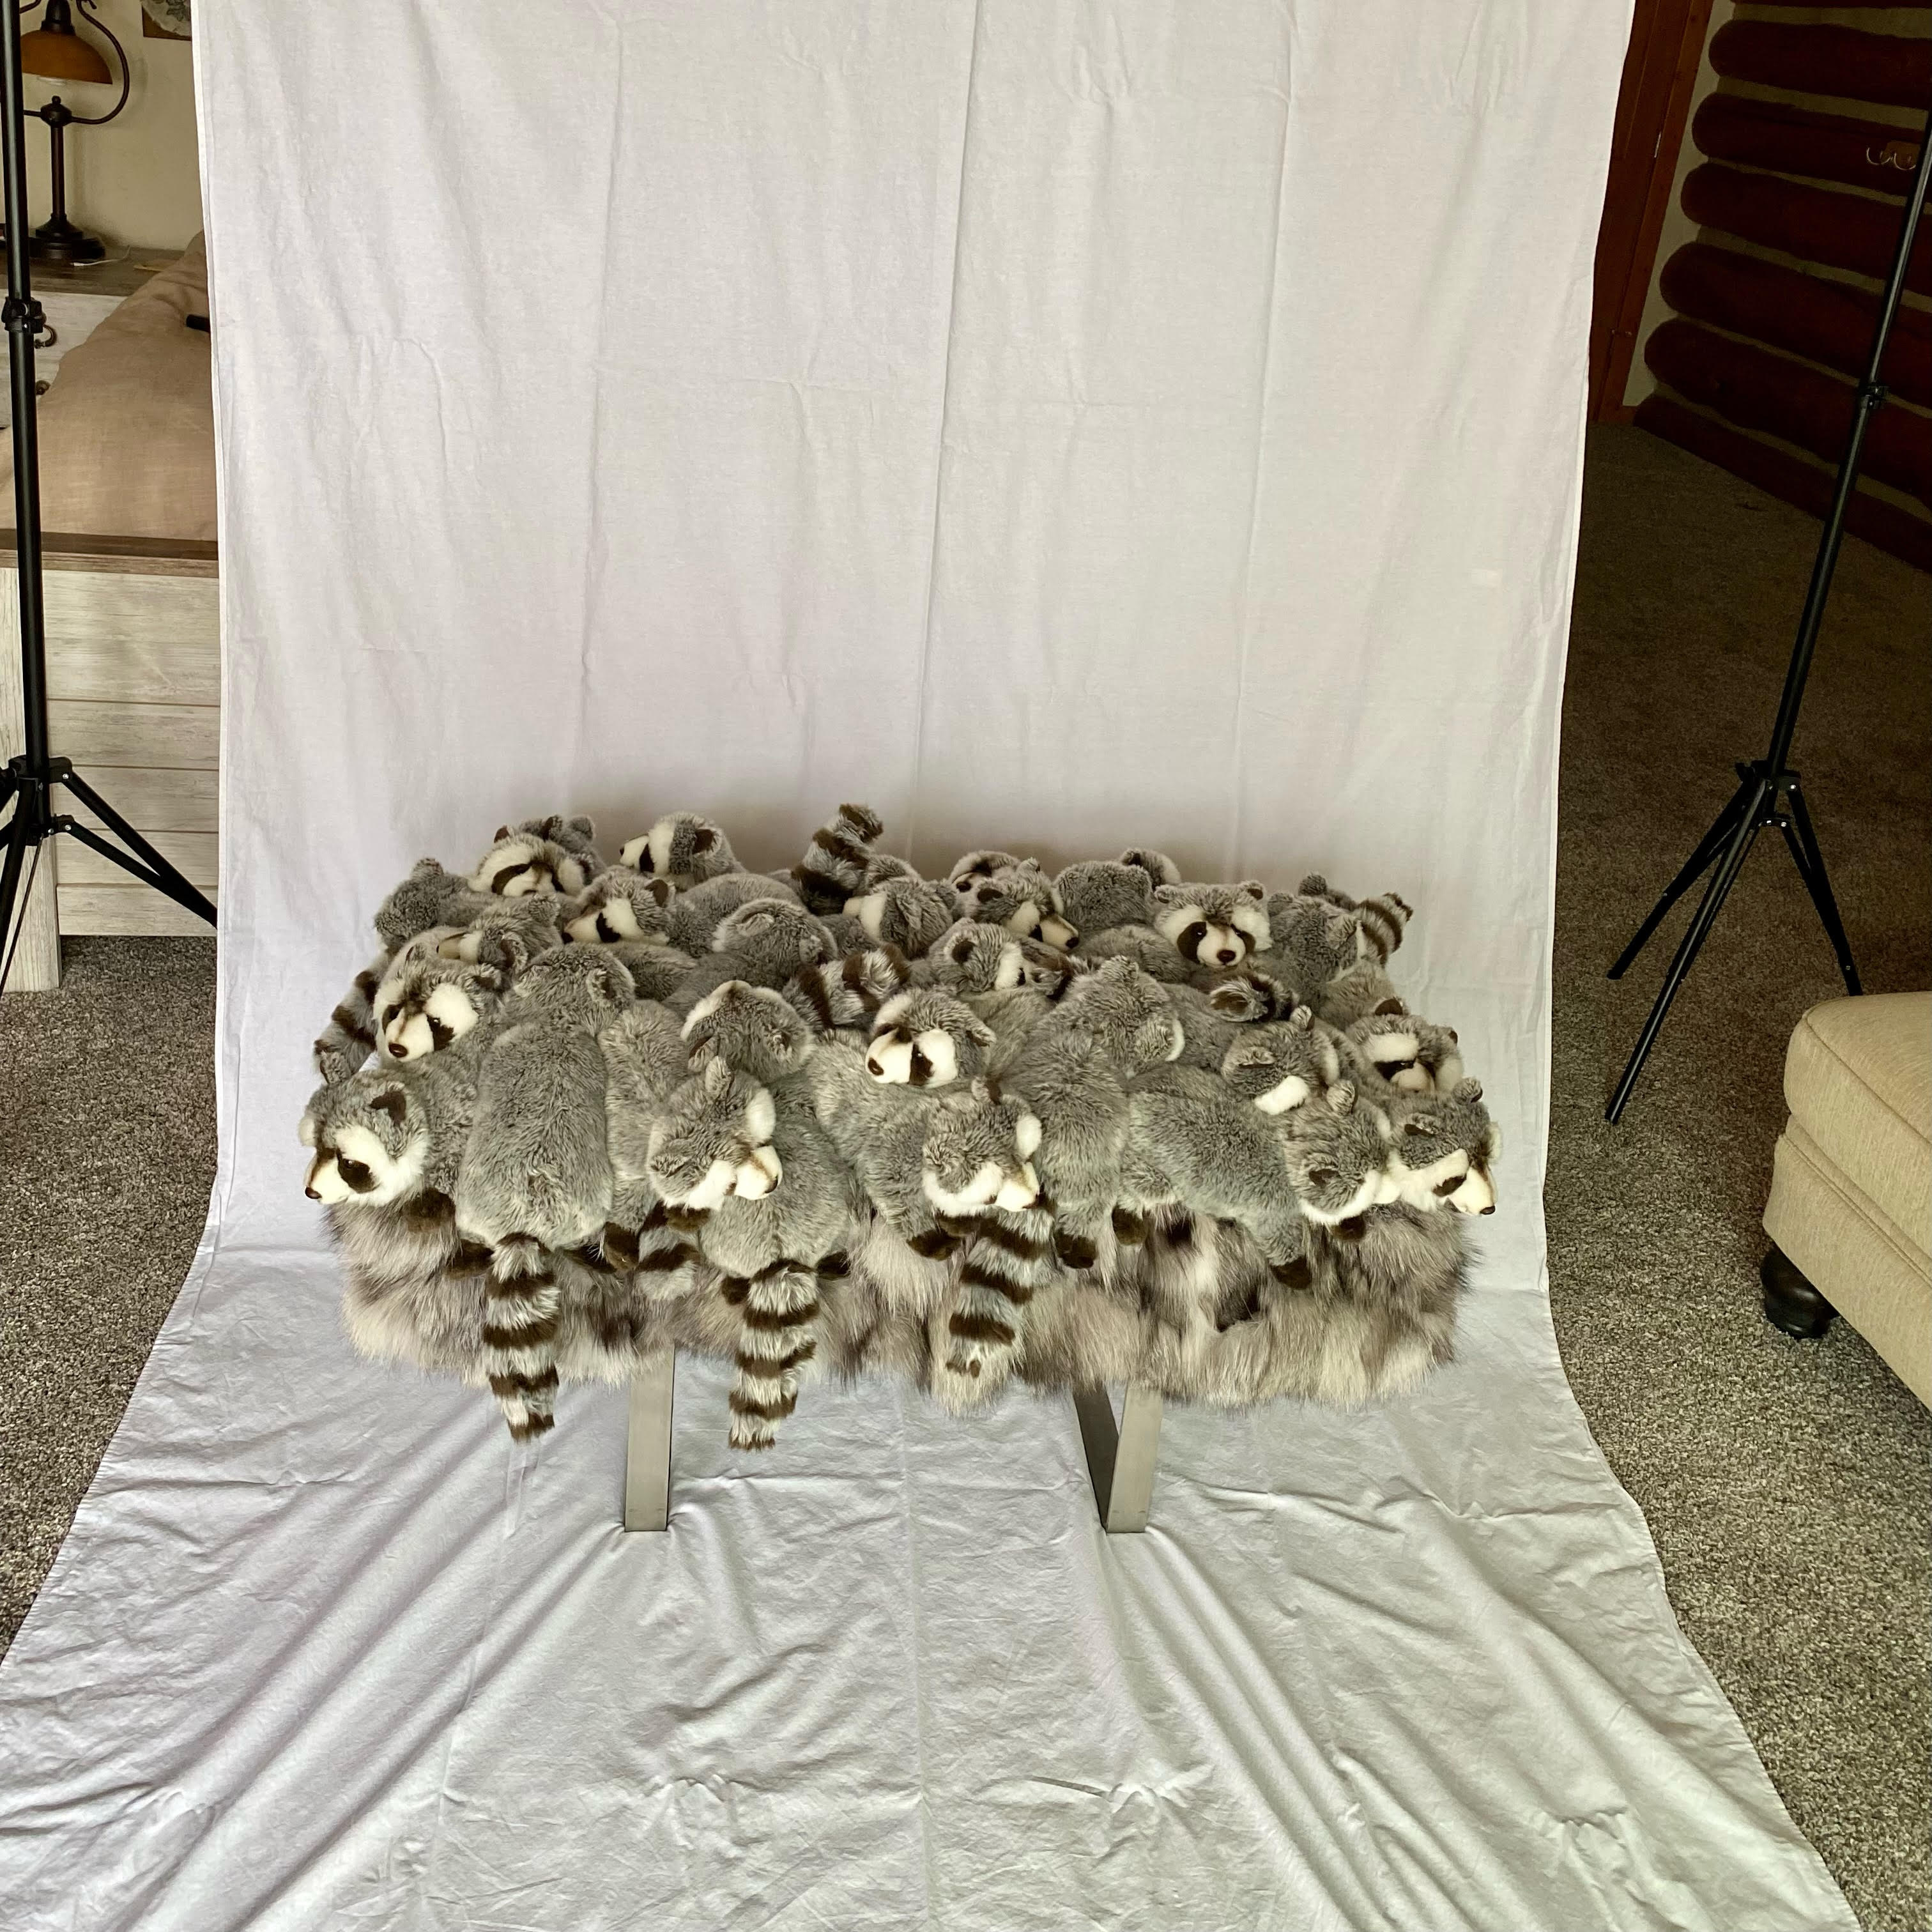 Contemporary French raccoon plus bench featuring numerous raccoon stuffed animals to compose the seating. Grey faux fur adorns the bottom half of the bench and is completed with metal legs. This bench is a unique piece to compliment a contemporary